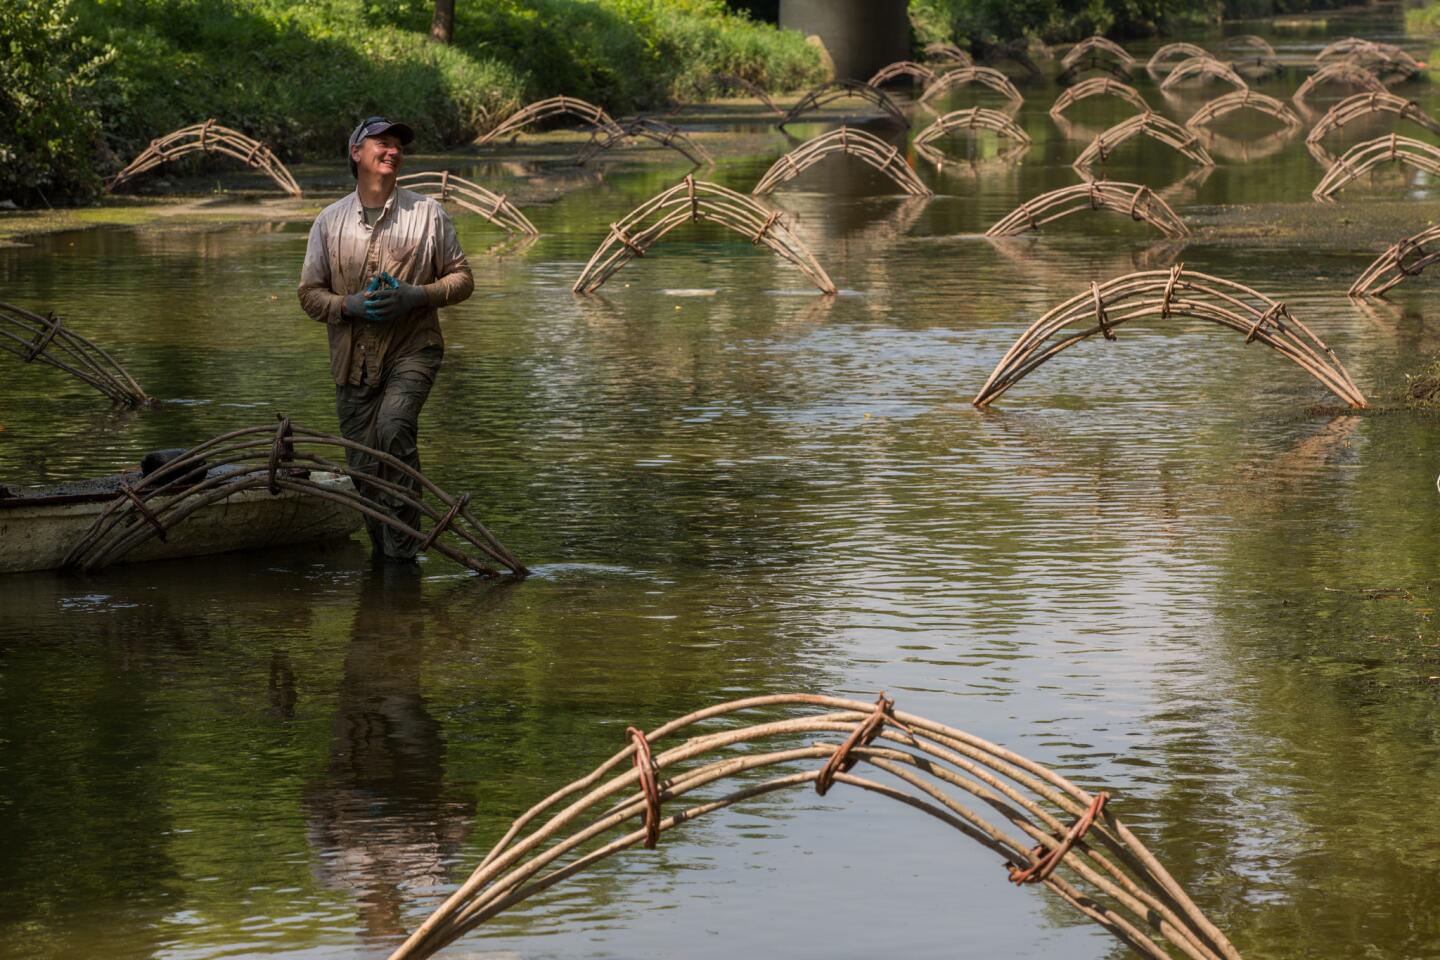 Artist John Siblik stands in the water with pieces of his sculpture.